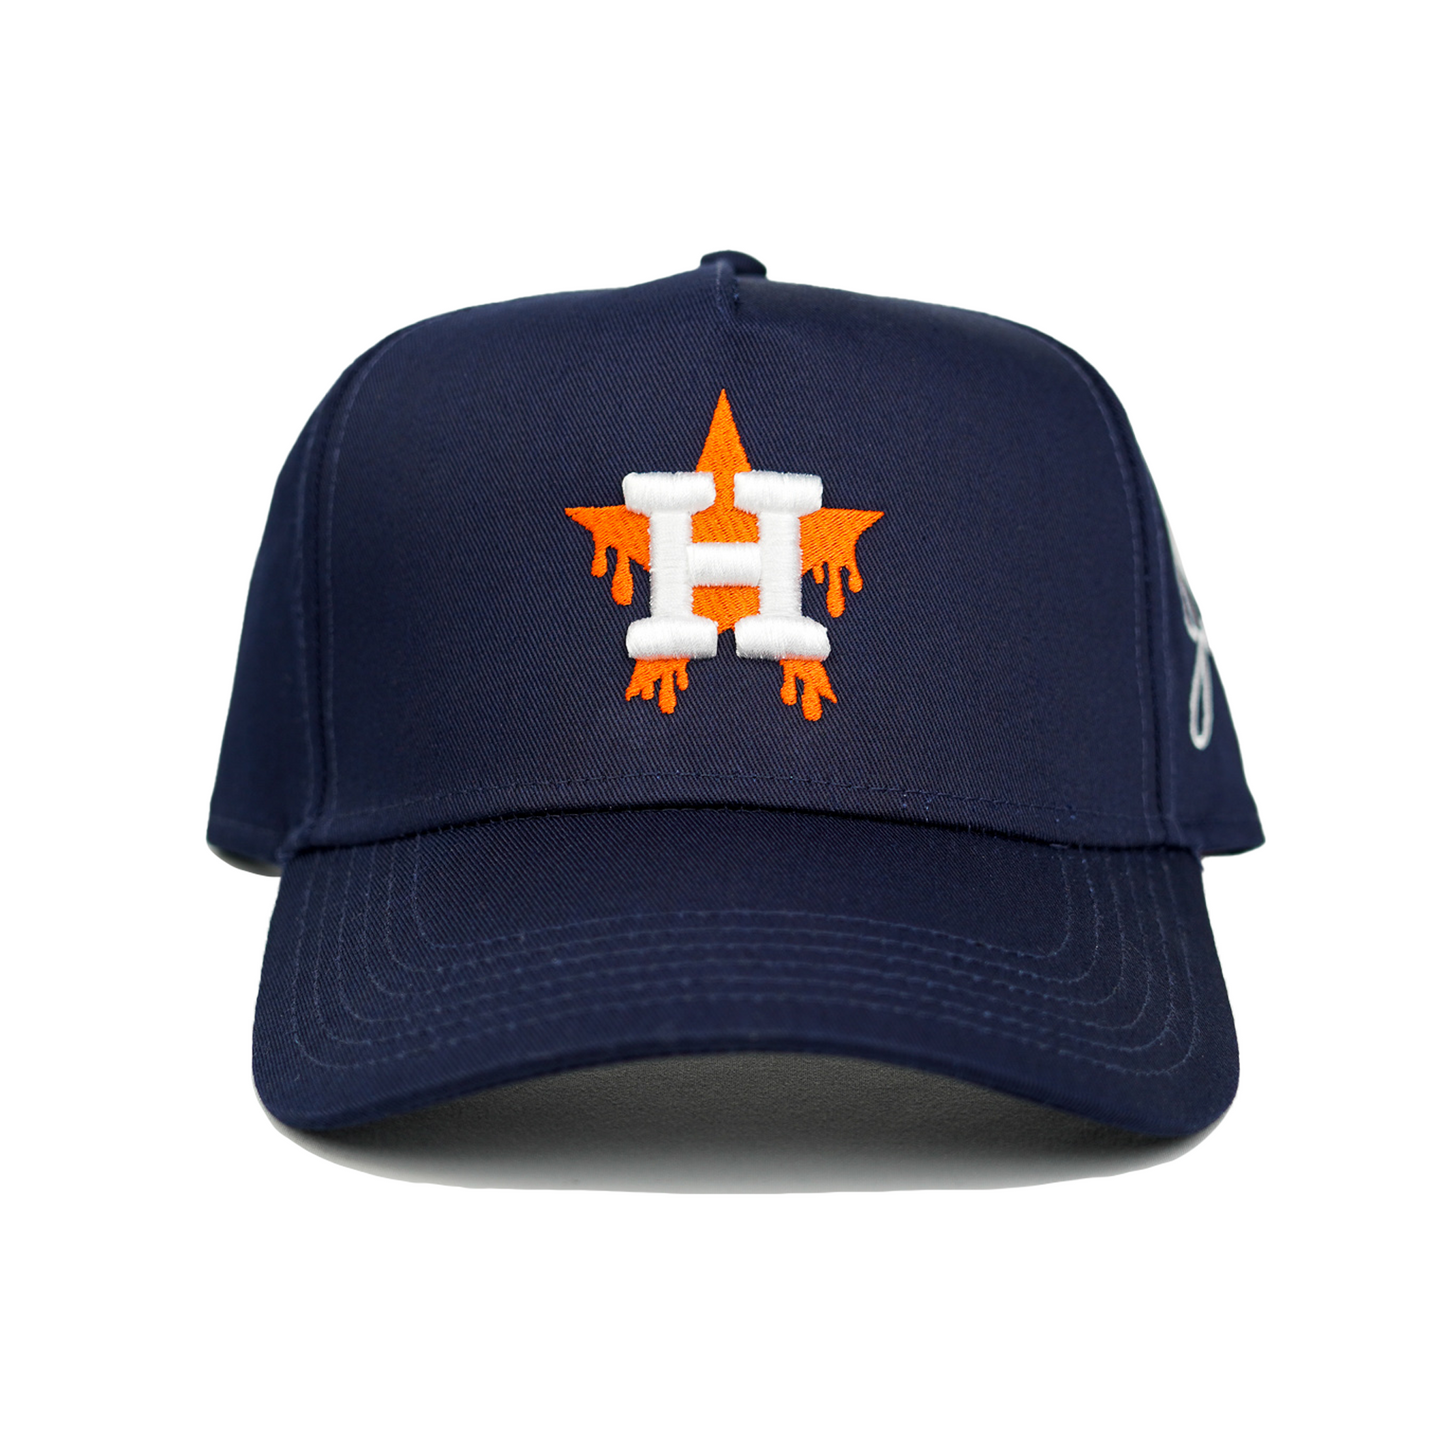 H-Town Dripping Snapback Hat (NAVY BLUE)